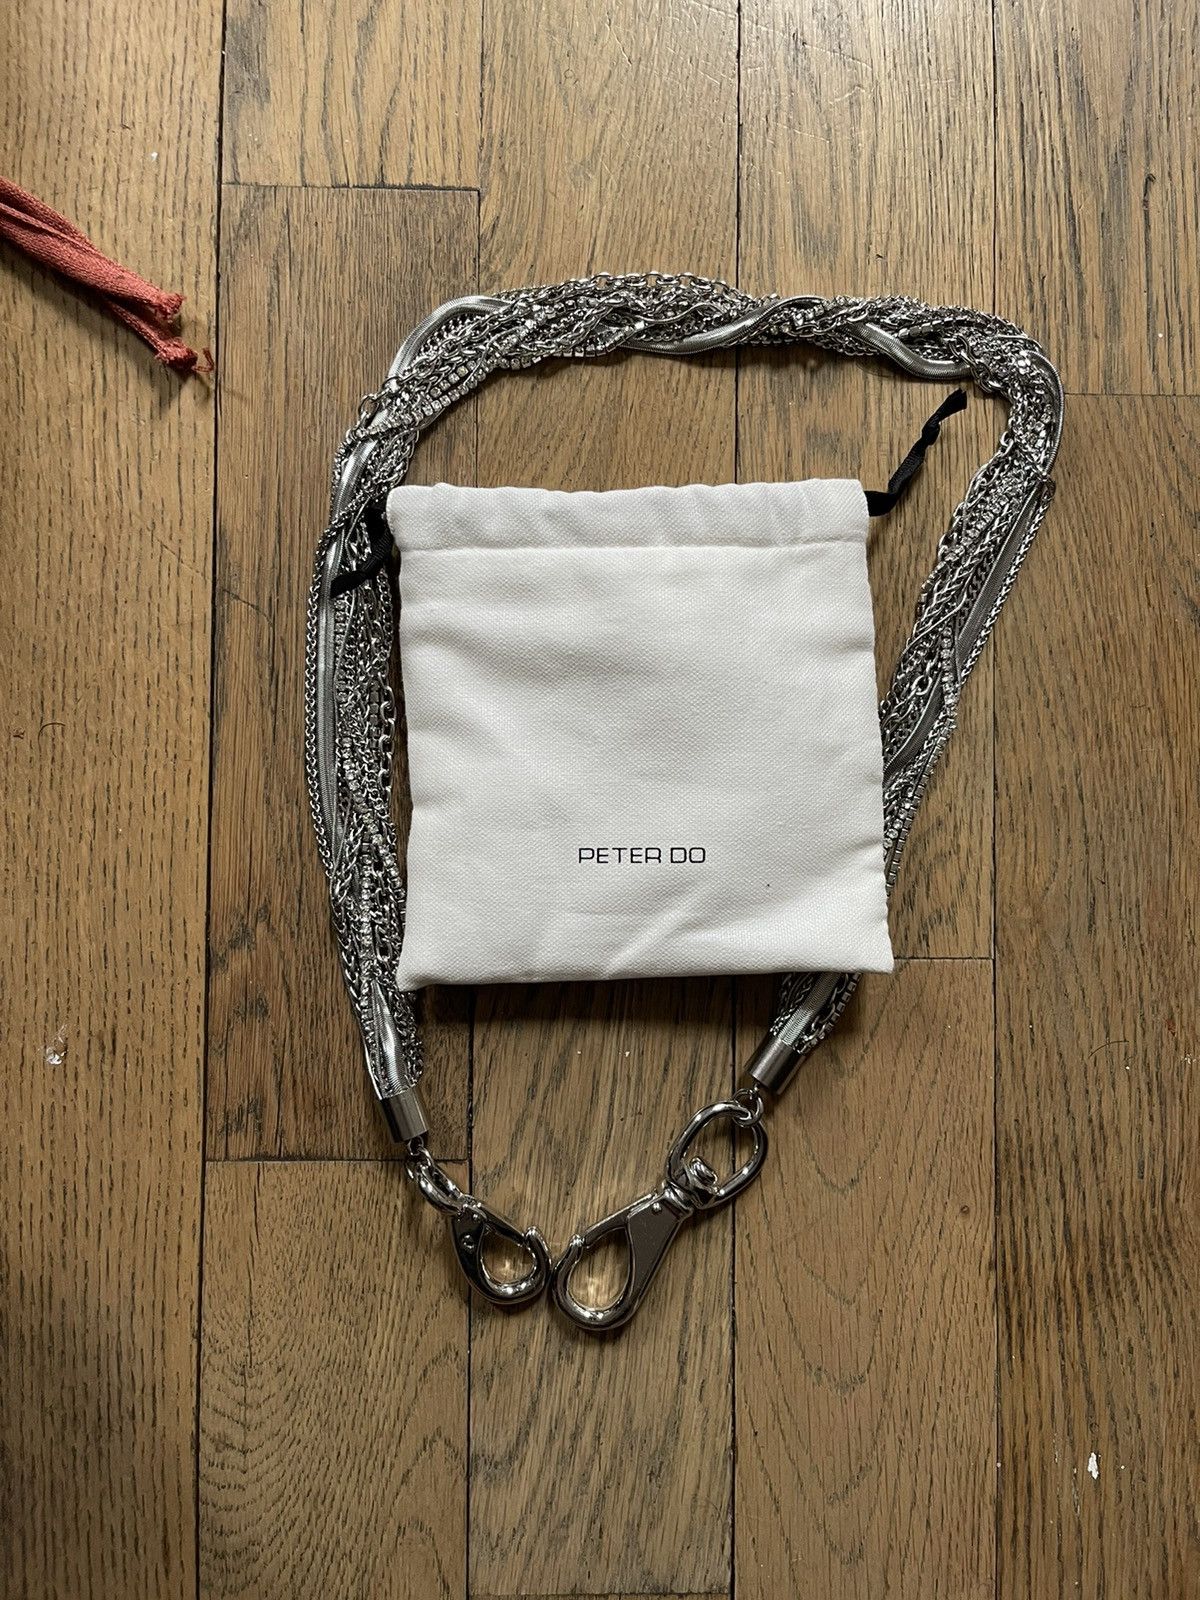 Peter Do チェーン ネックレス multi chain necklace - 通販 ...